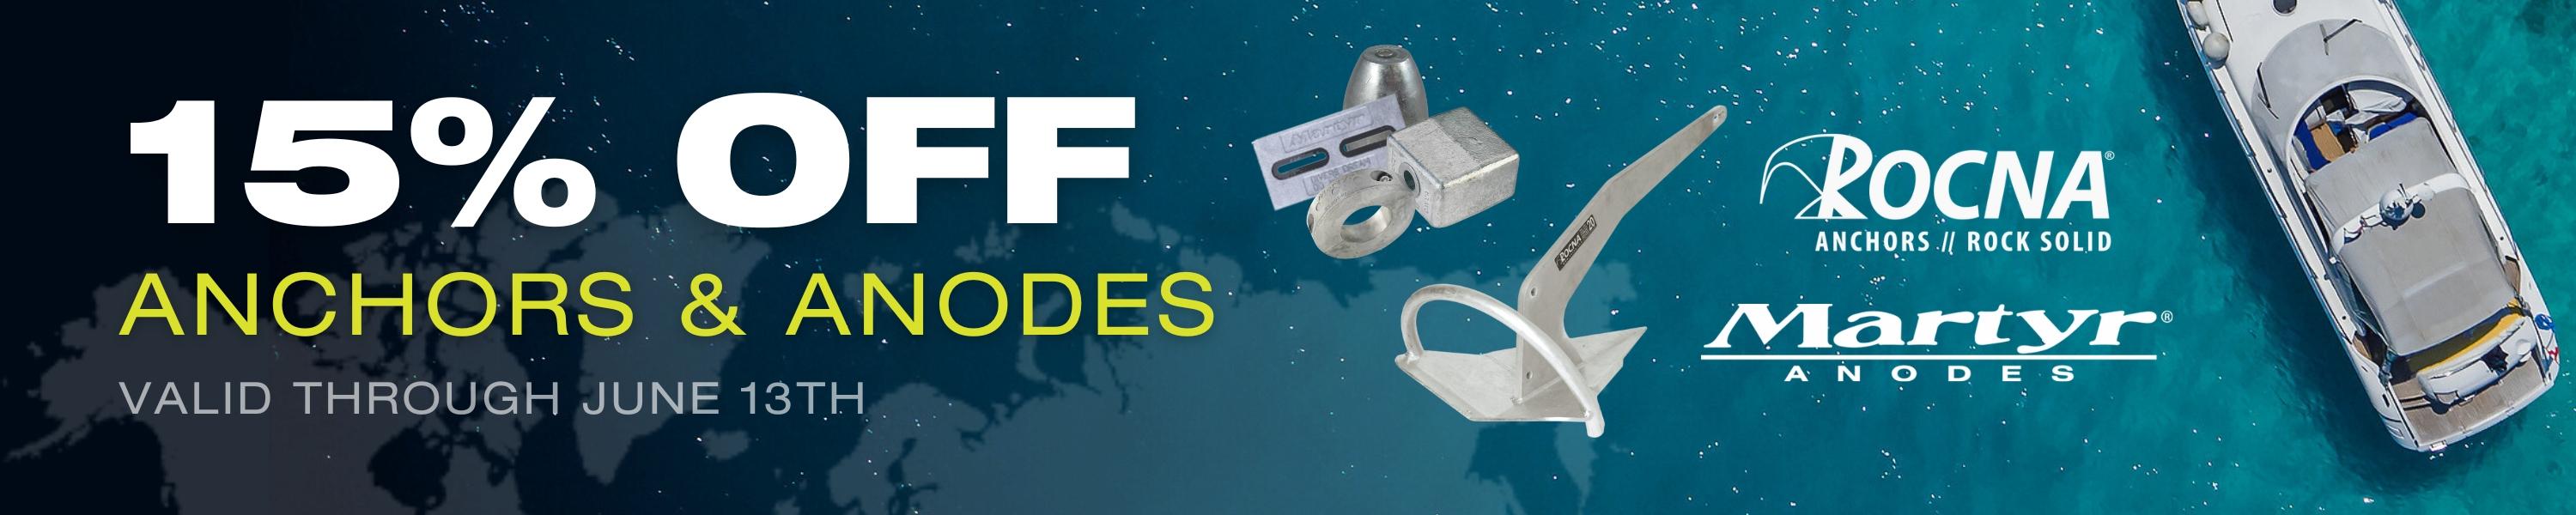 15% Off Anchors and Anodes